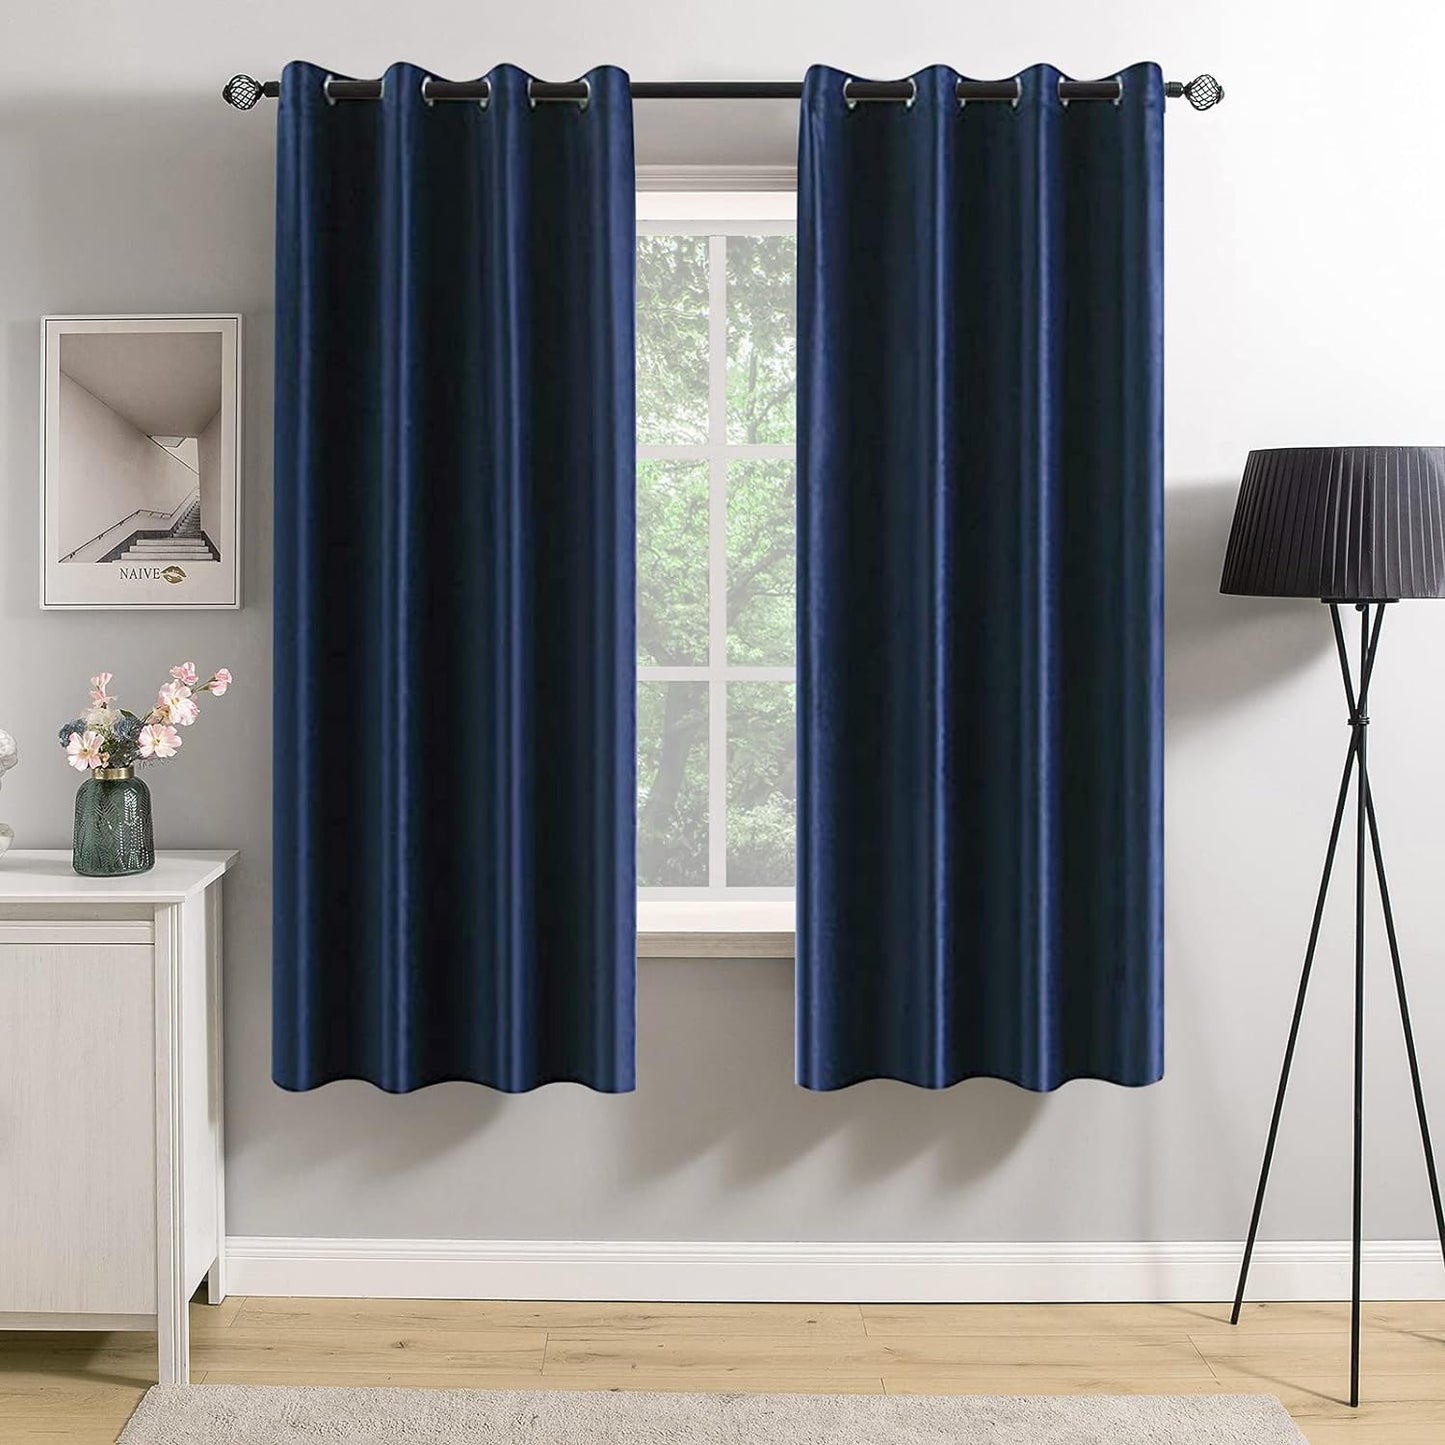 MIULEE Velvet Curtains Olive Green Elegant Grommet Curtains Thermal Insulated Soundproof Room Darkening Curtains/Drapes for Classical Living Room Bedroom Decor 52 X 84 Inch Set of 2  MIULEE Royal Blue W52 X L63 